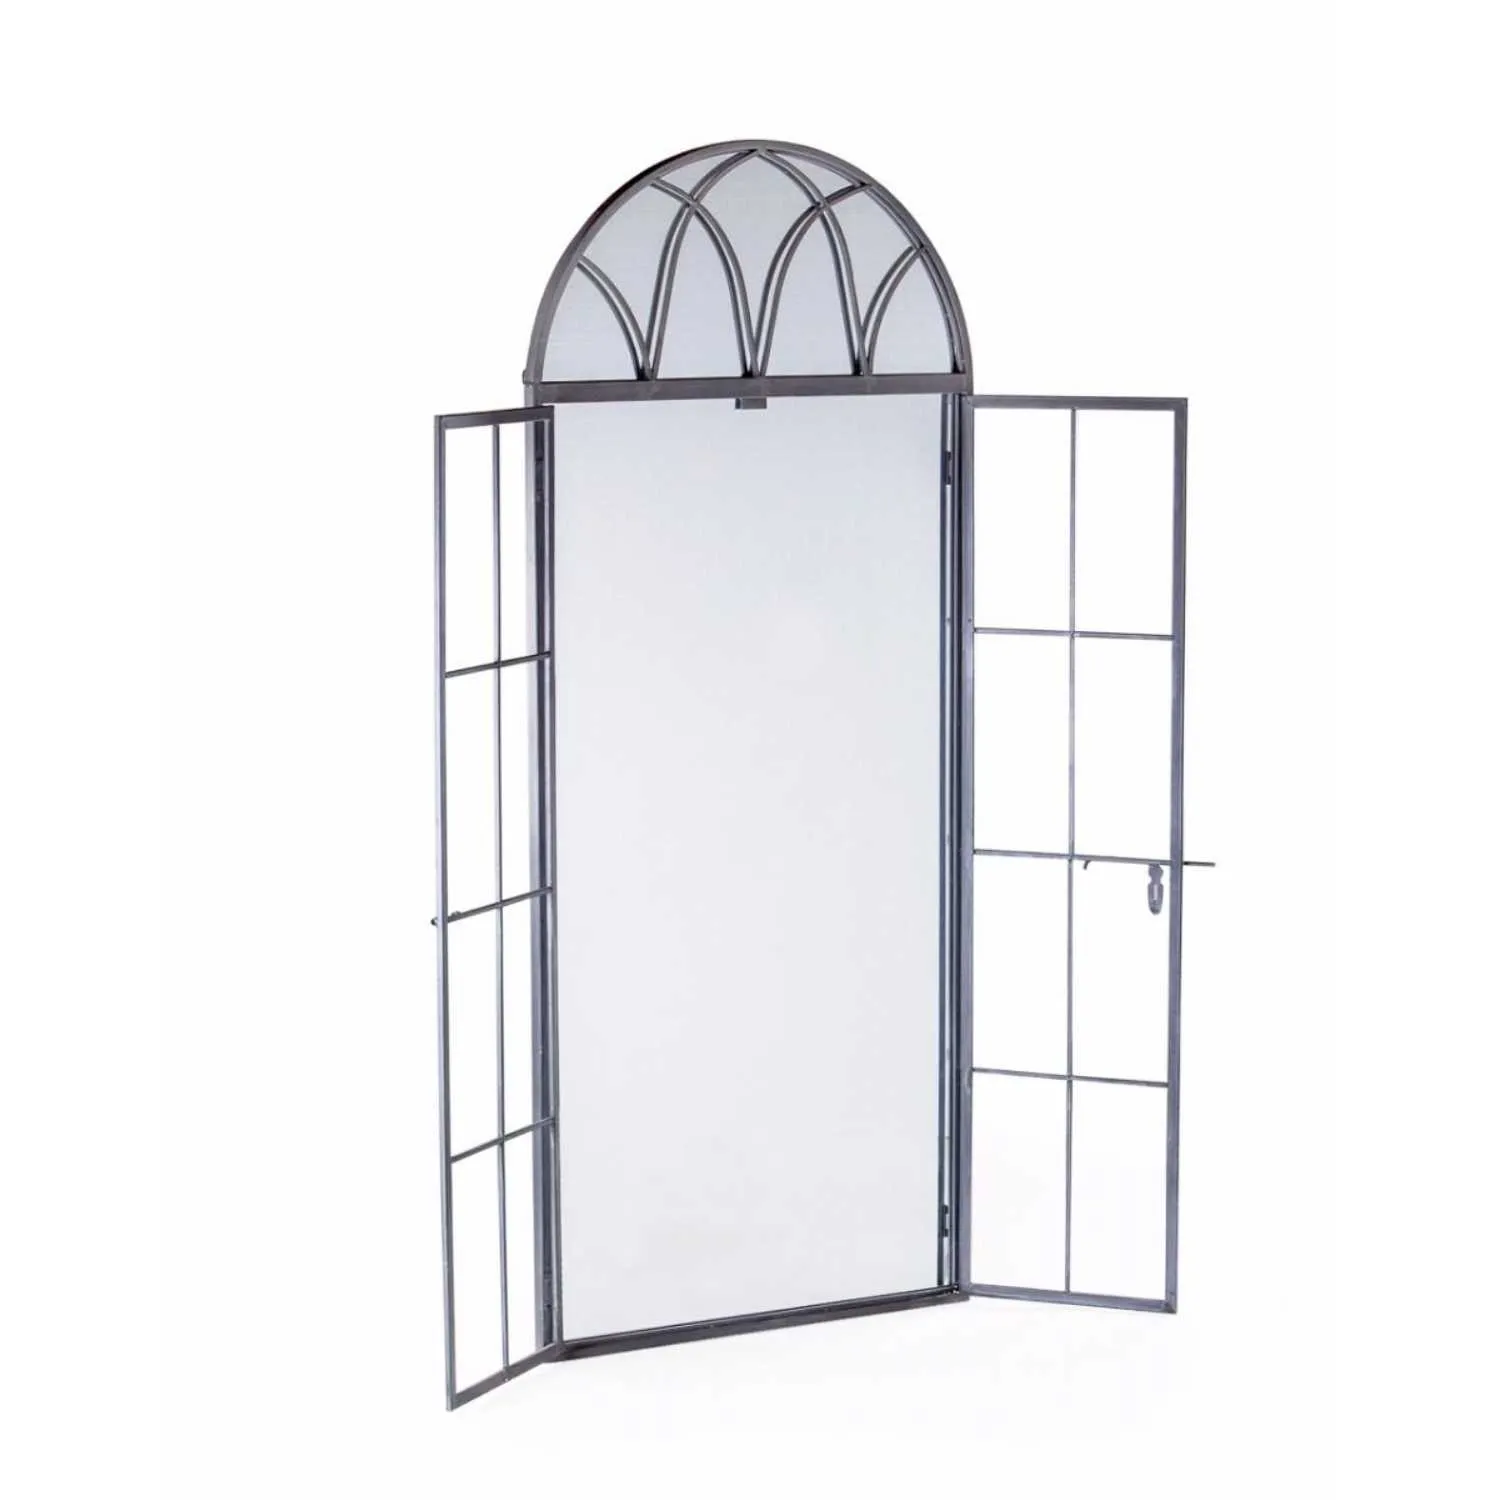 Grey Metal Tall Arched Opening Window Wall Mirror